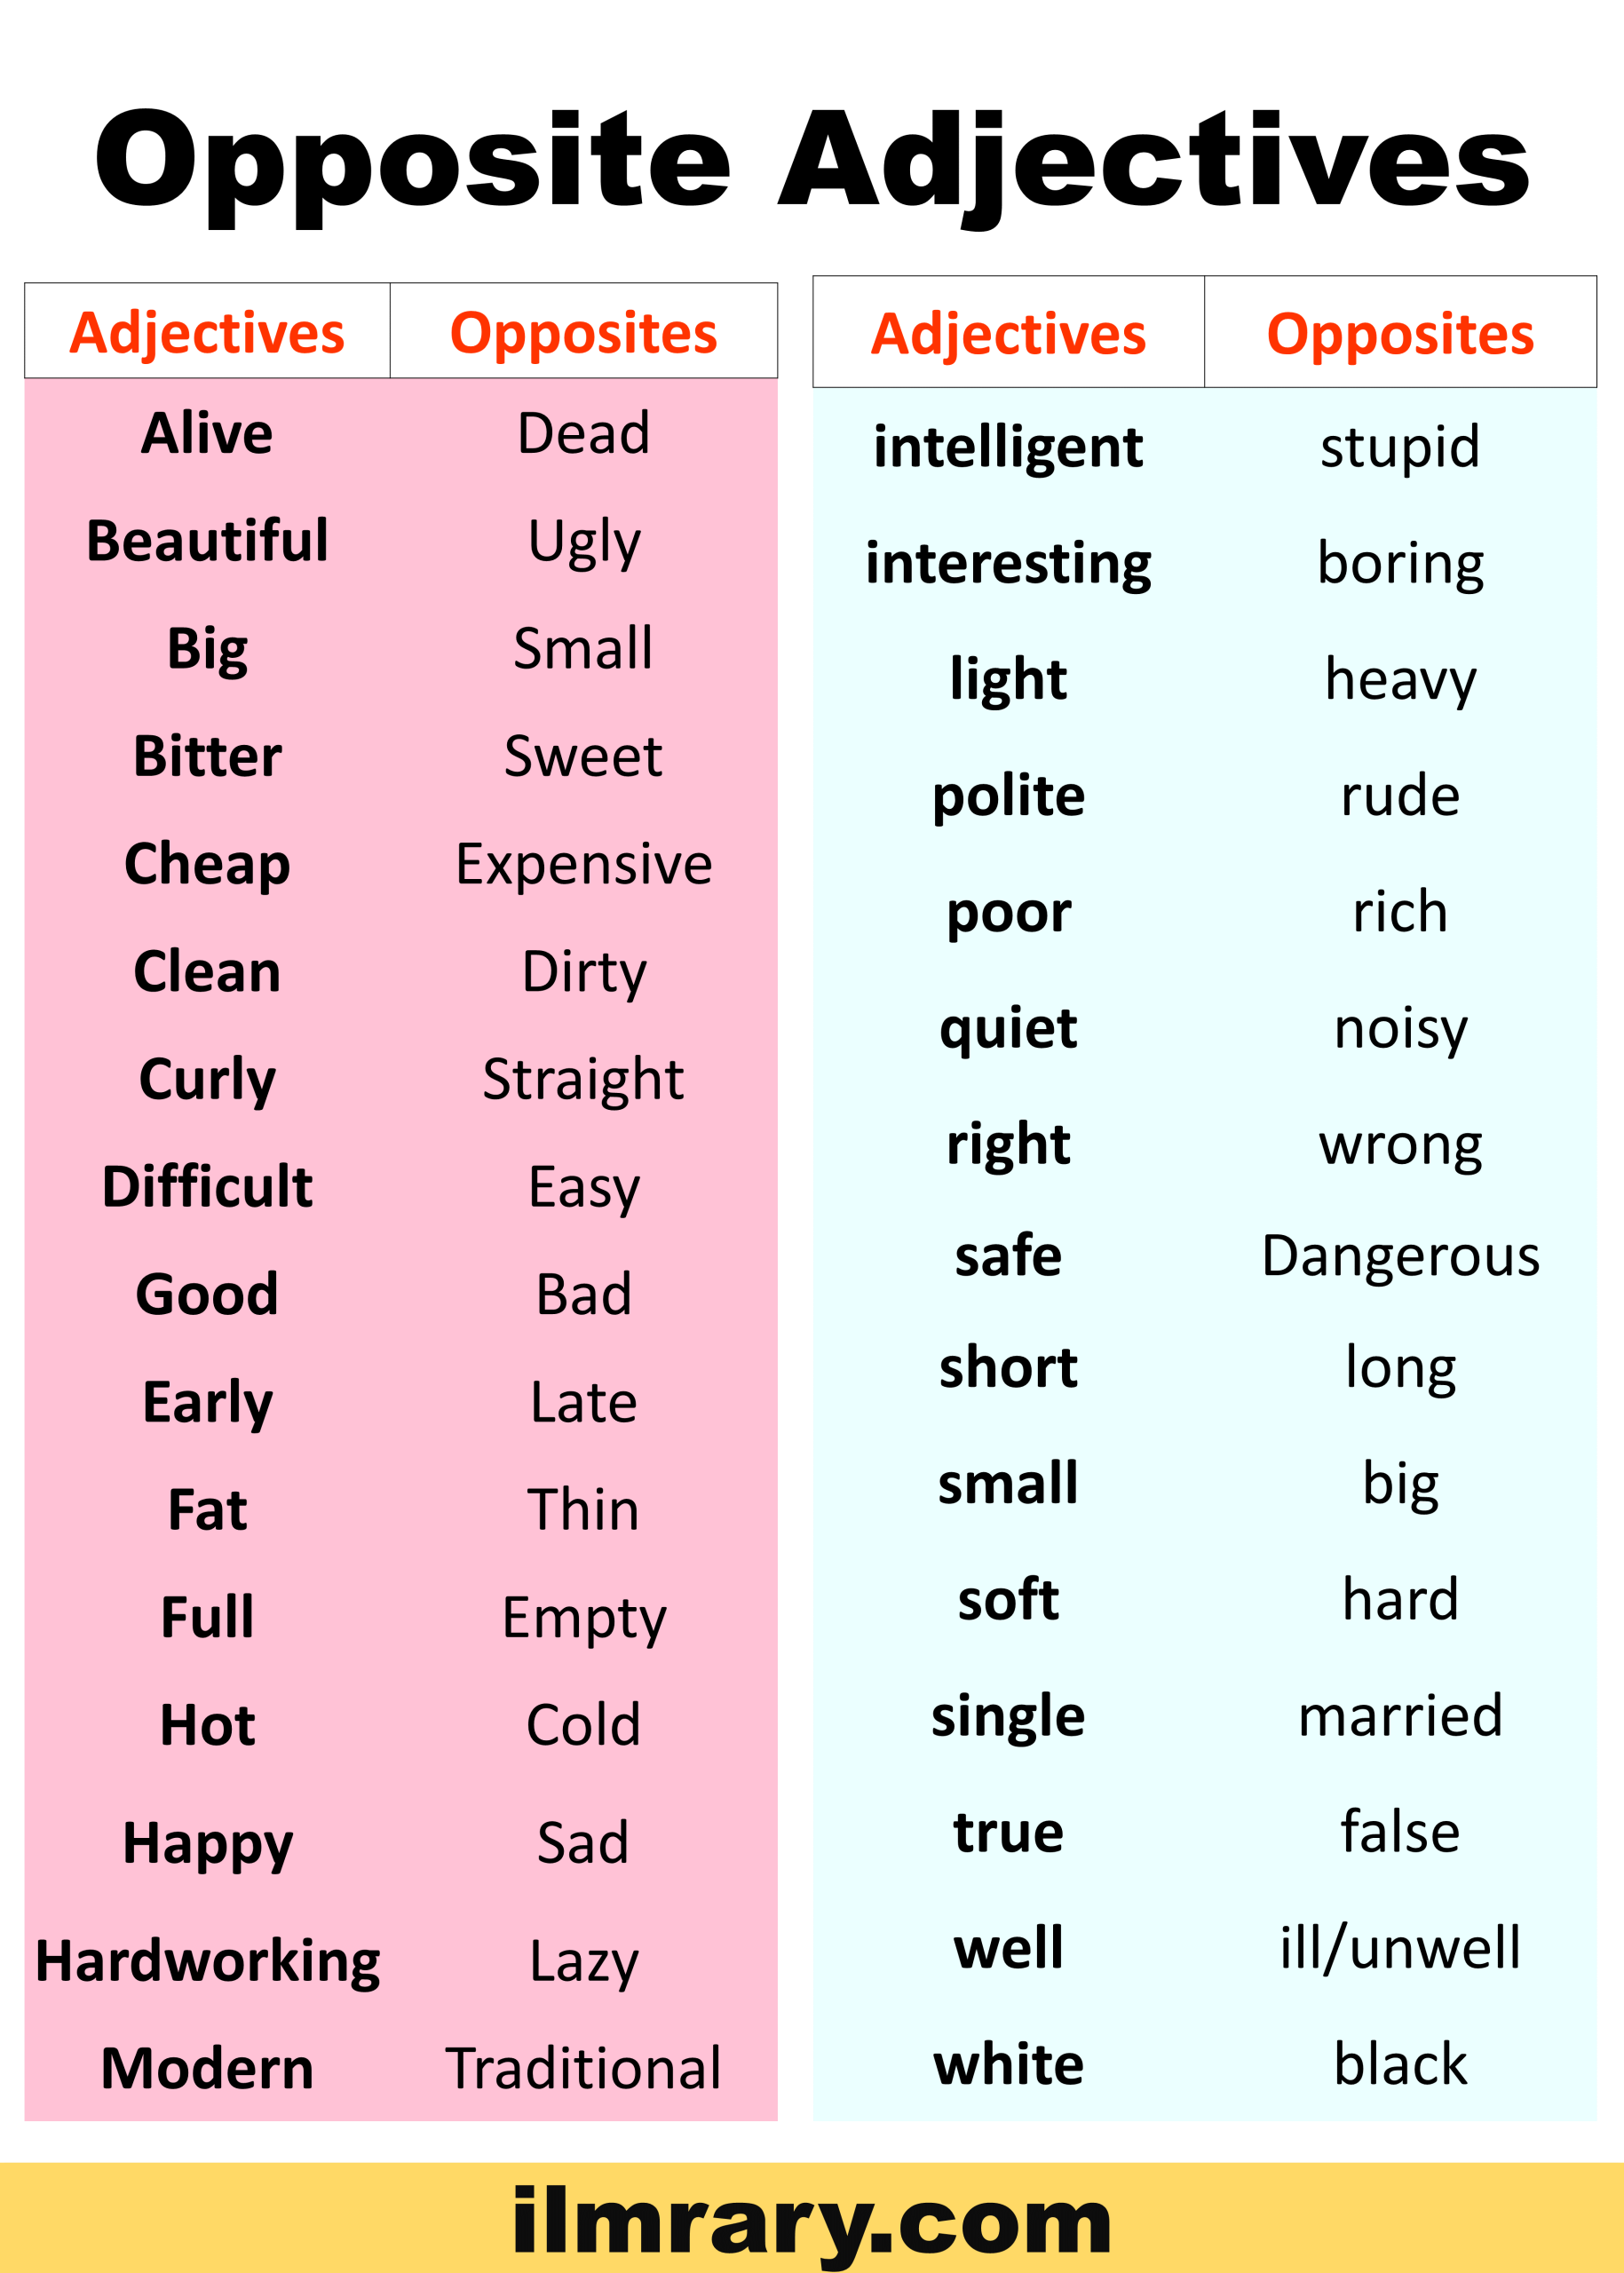 100 List Of Opposite Adjectives In English ILmrary